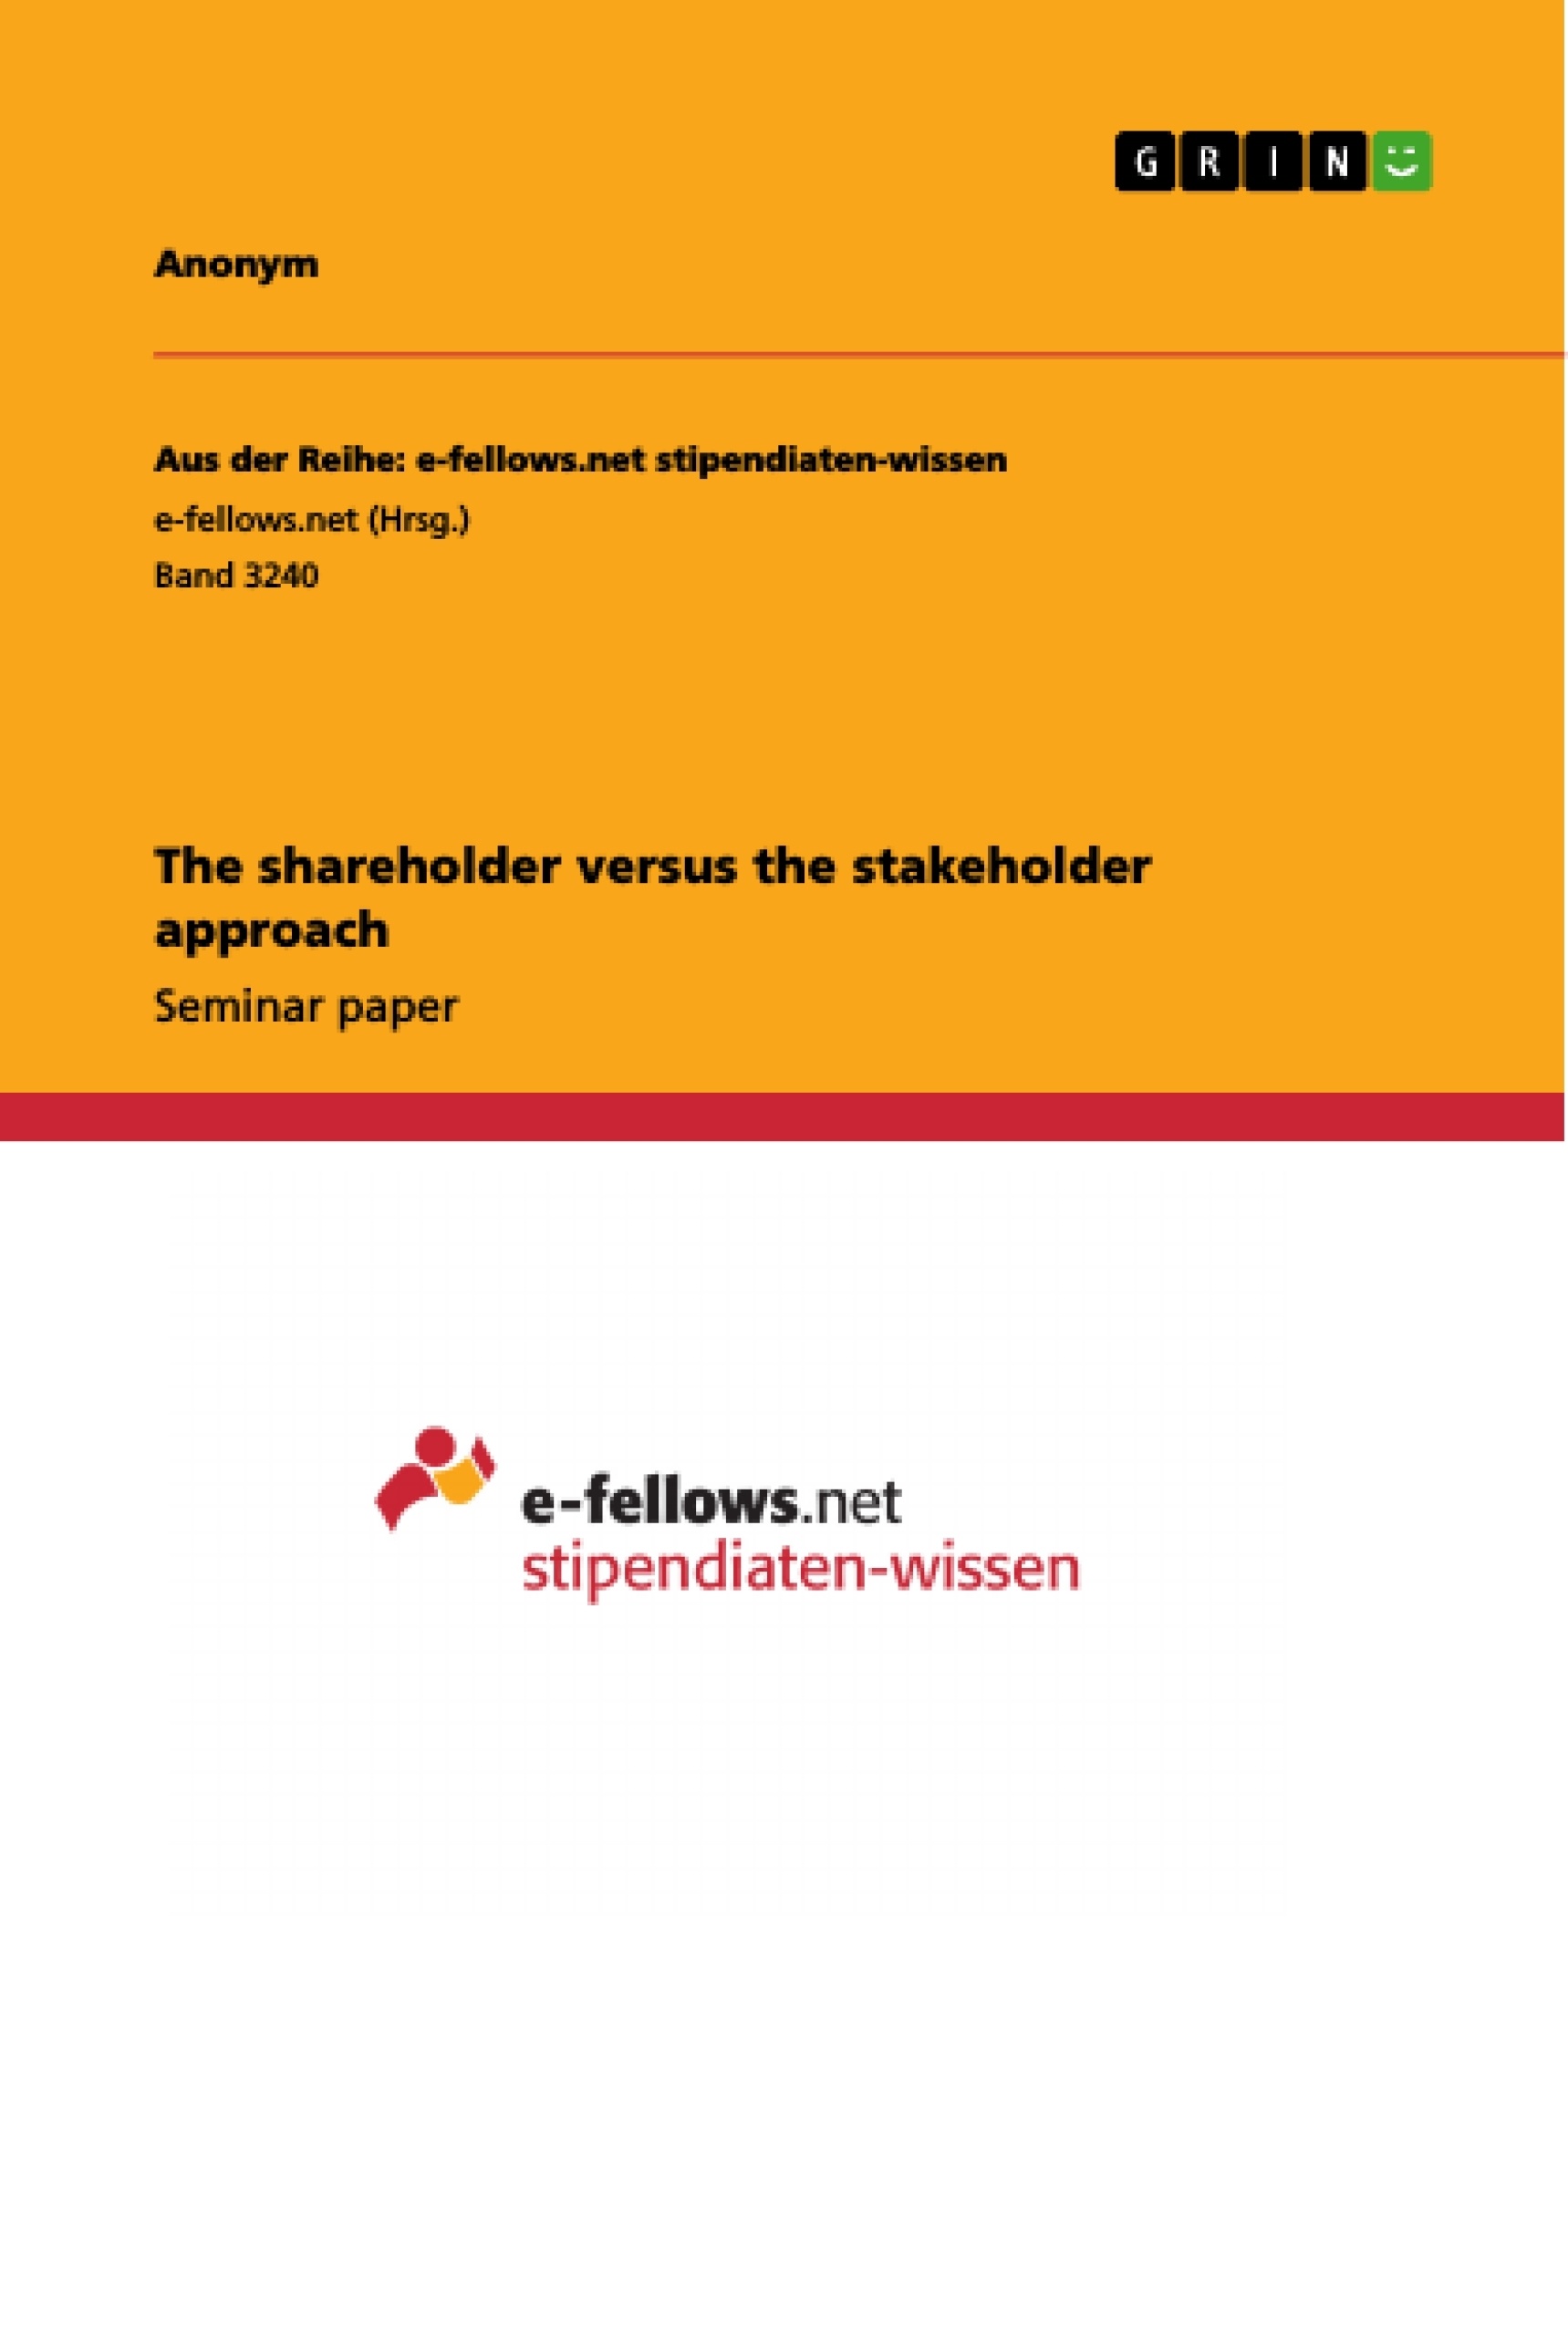 Title: The shareholder versus the stakeholder approach